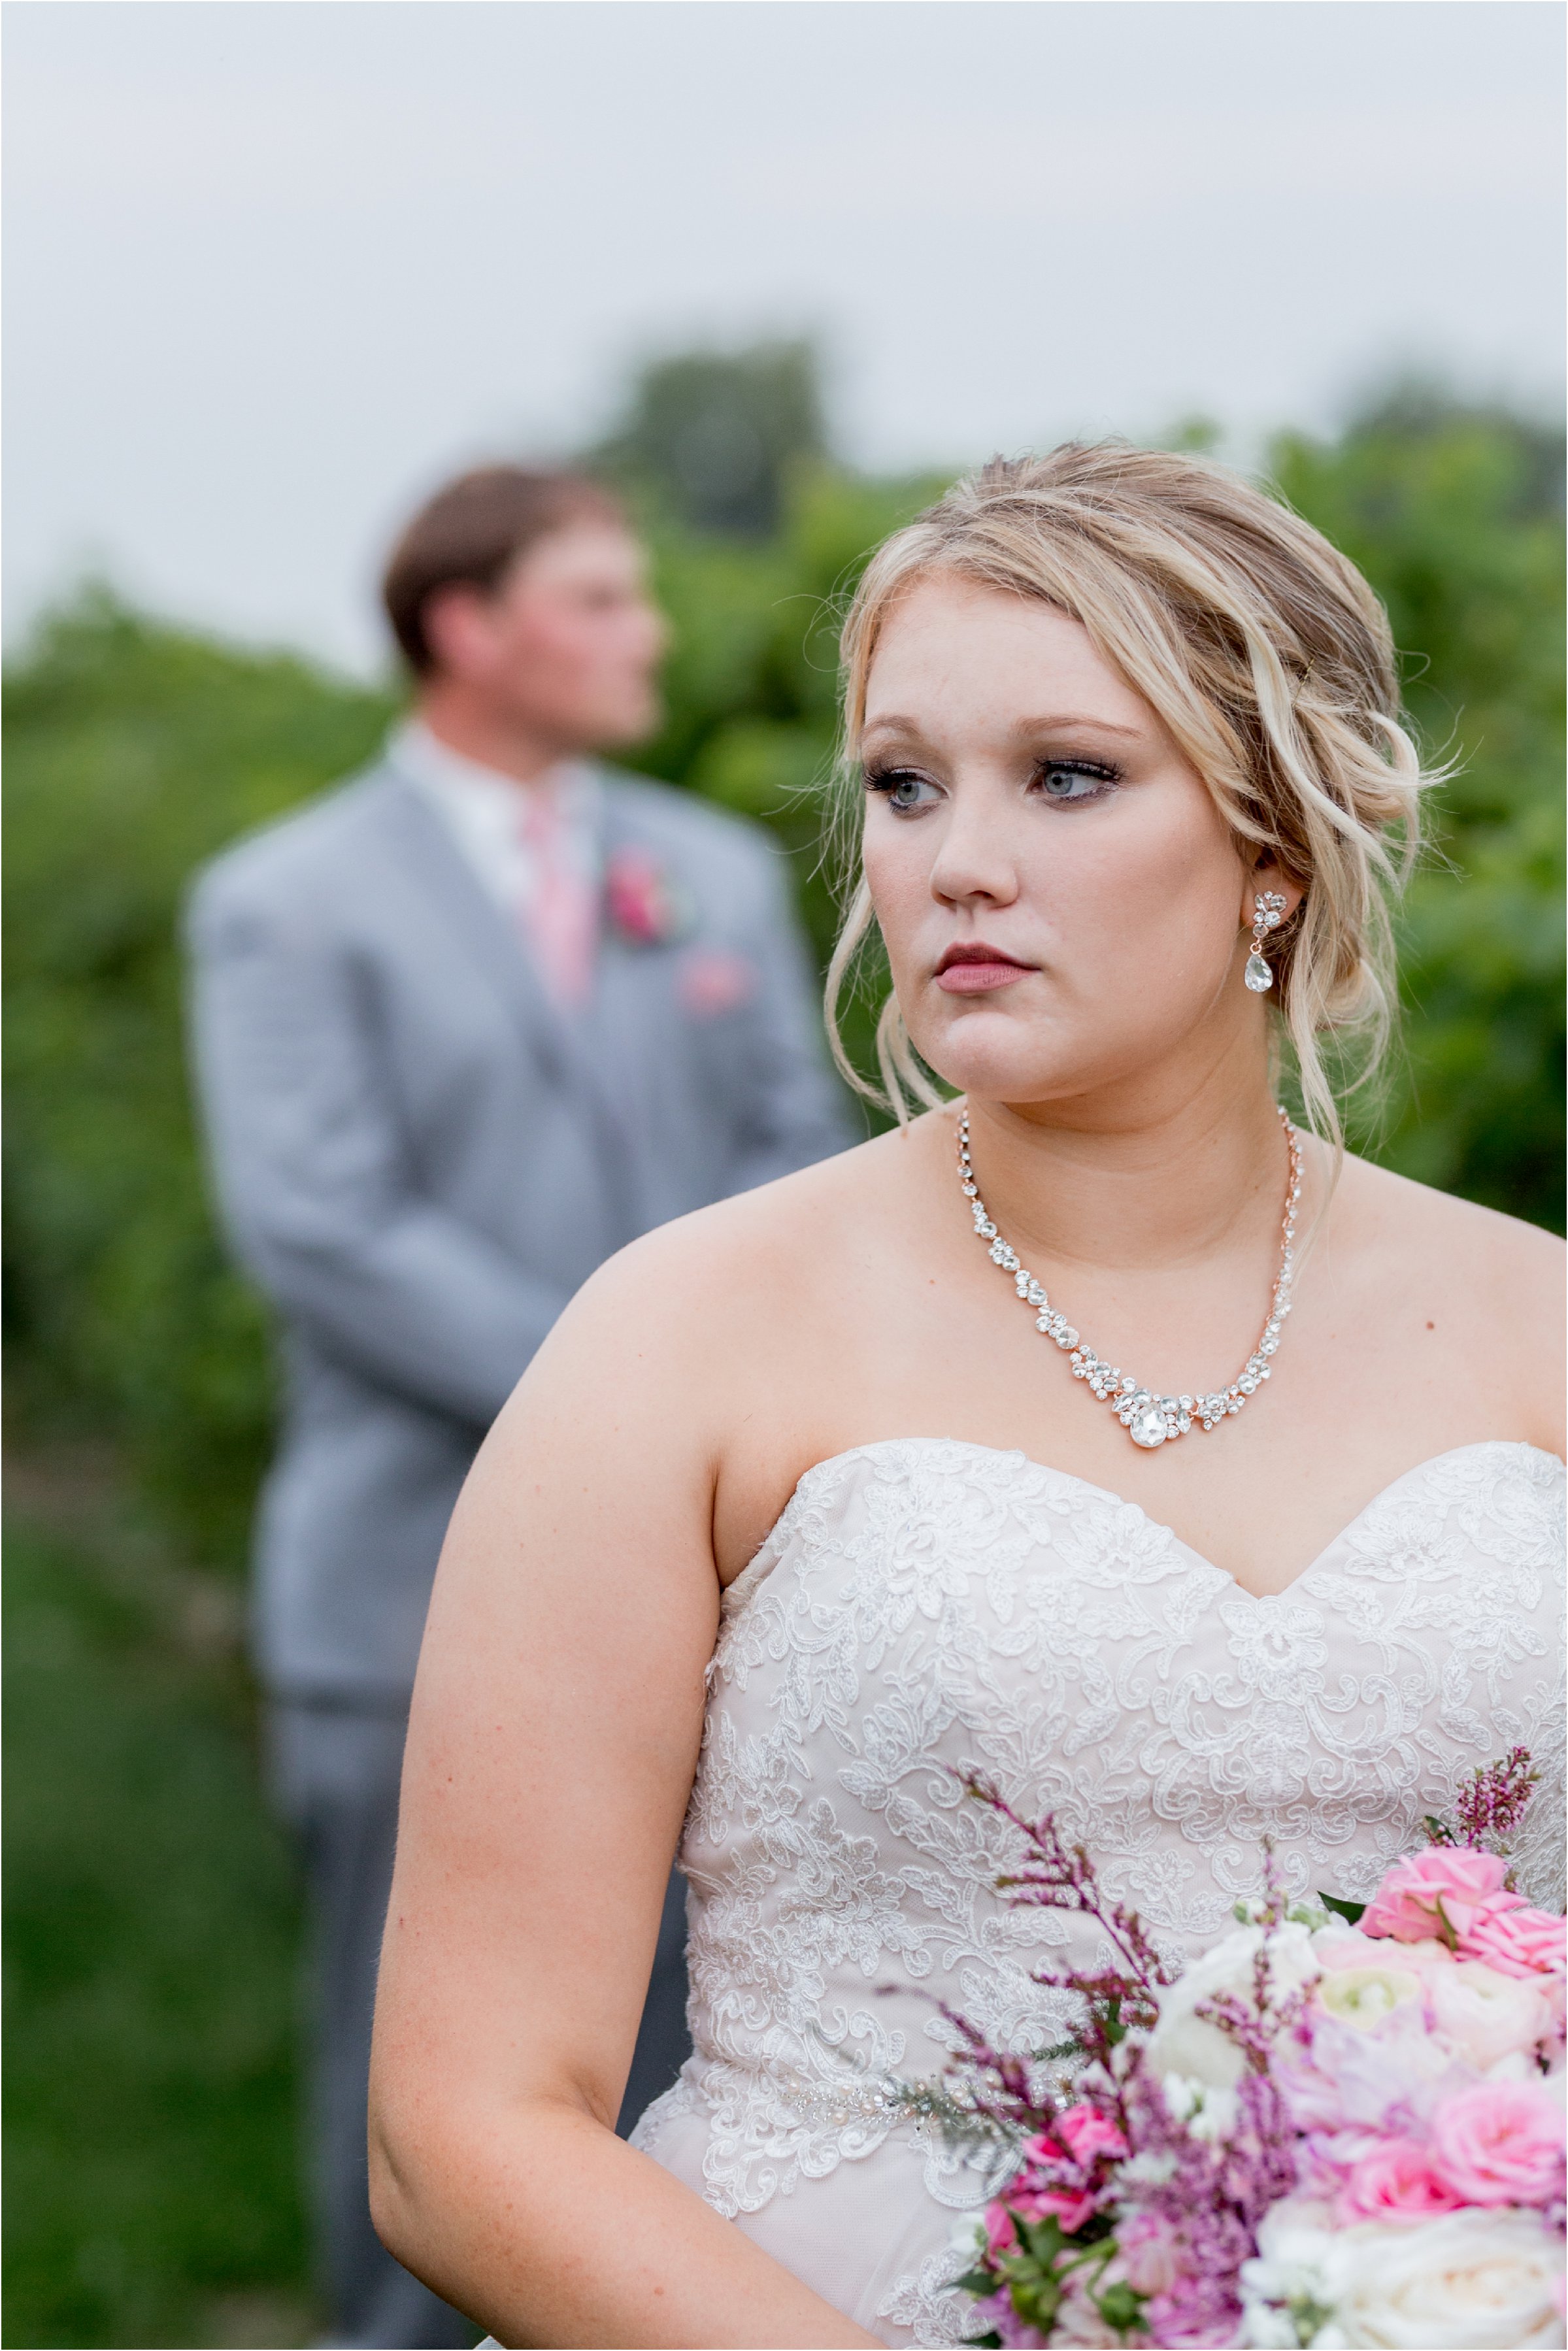 the bride in the foreground looking off to the left while the groom in the background looks off to the right